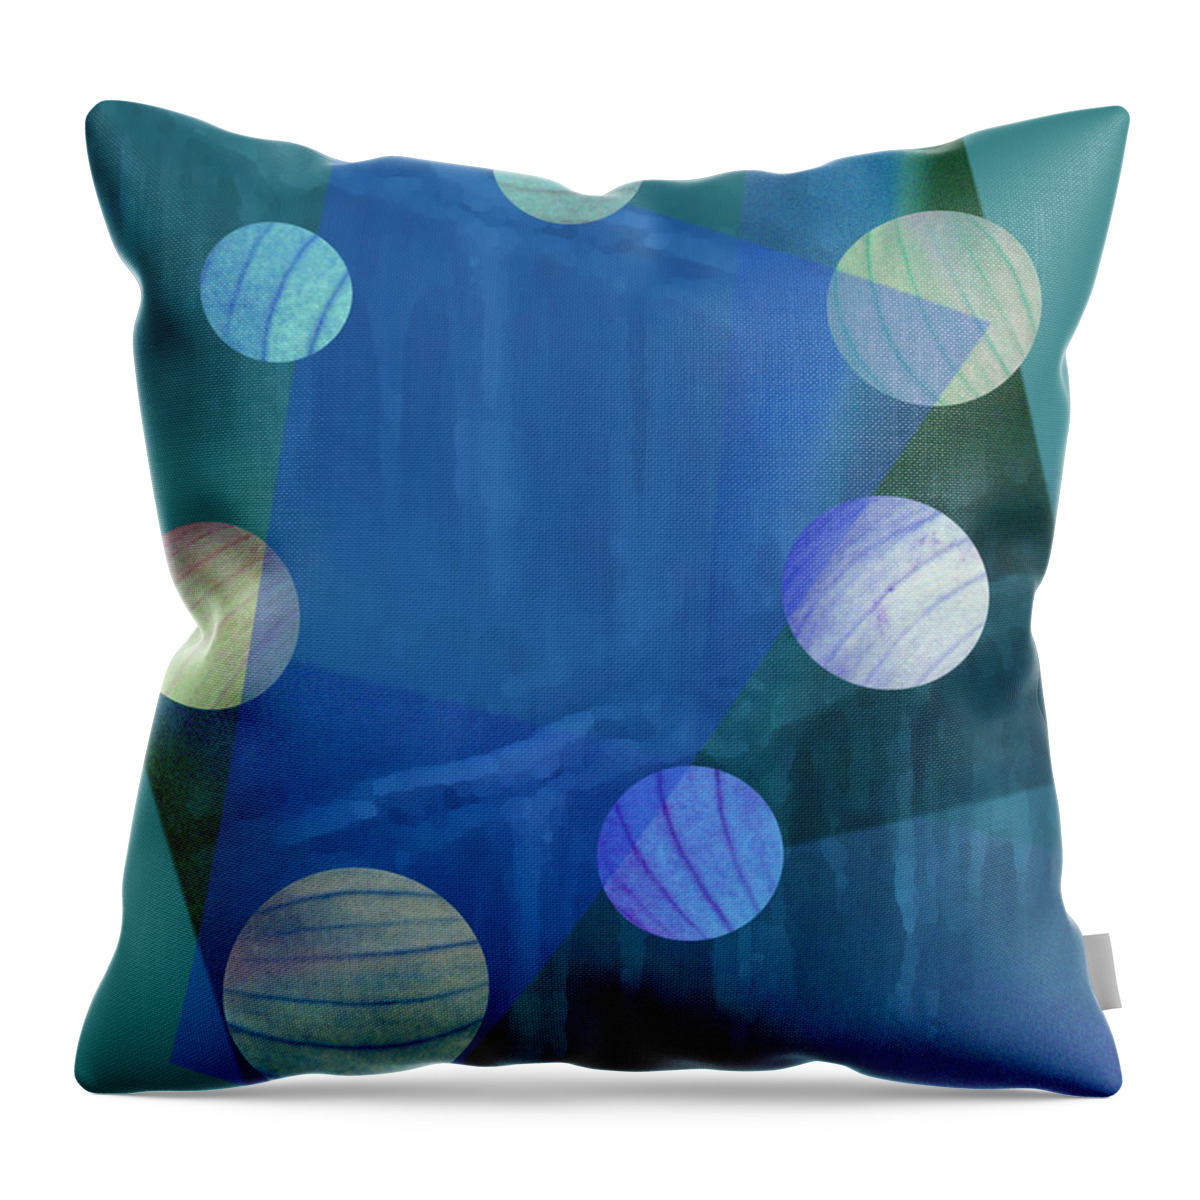 Transformation Throw Pillow featuring the photograph Transformation by Terri Harper